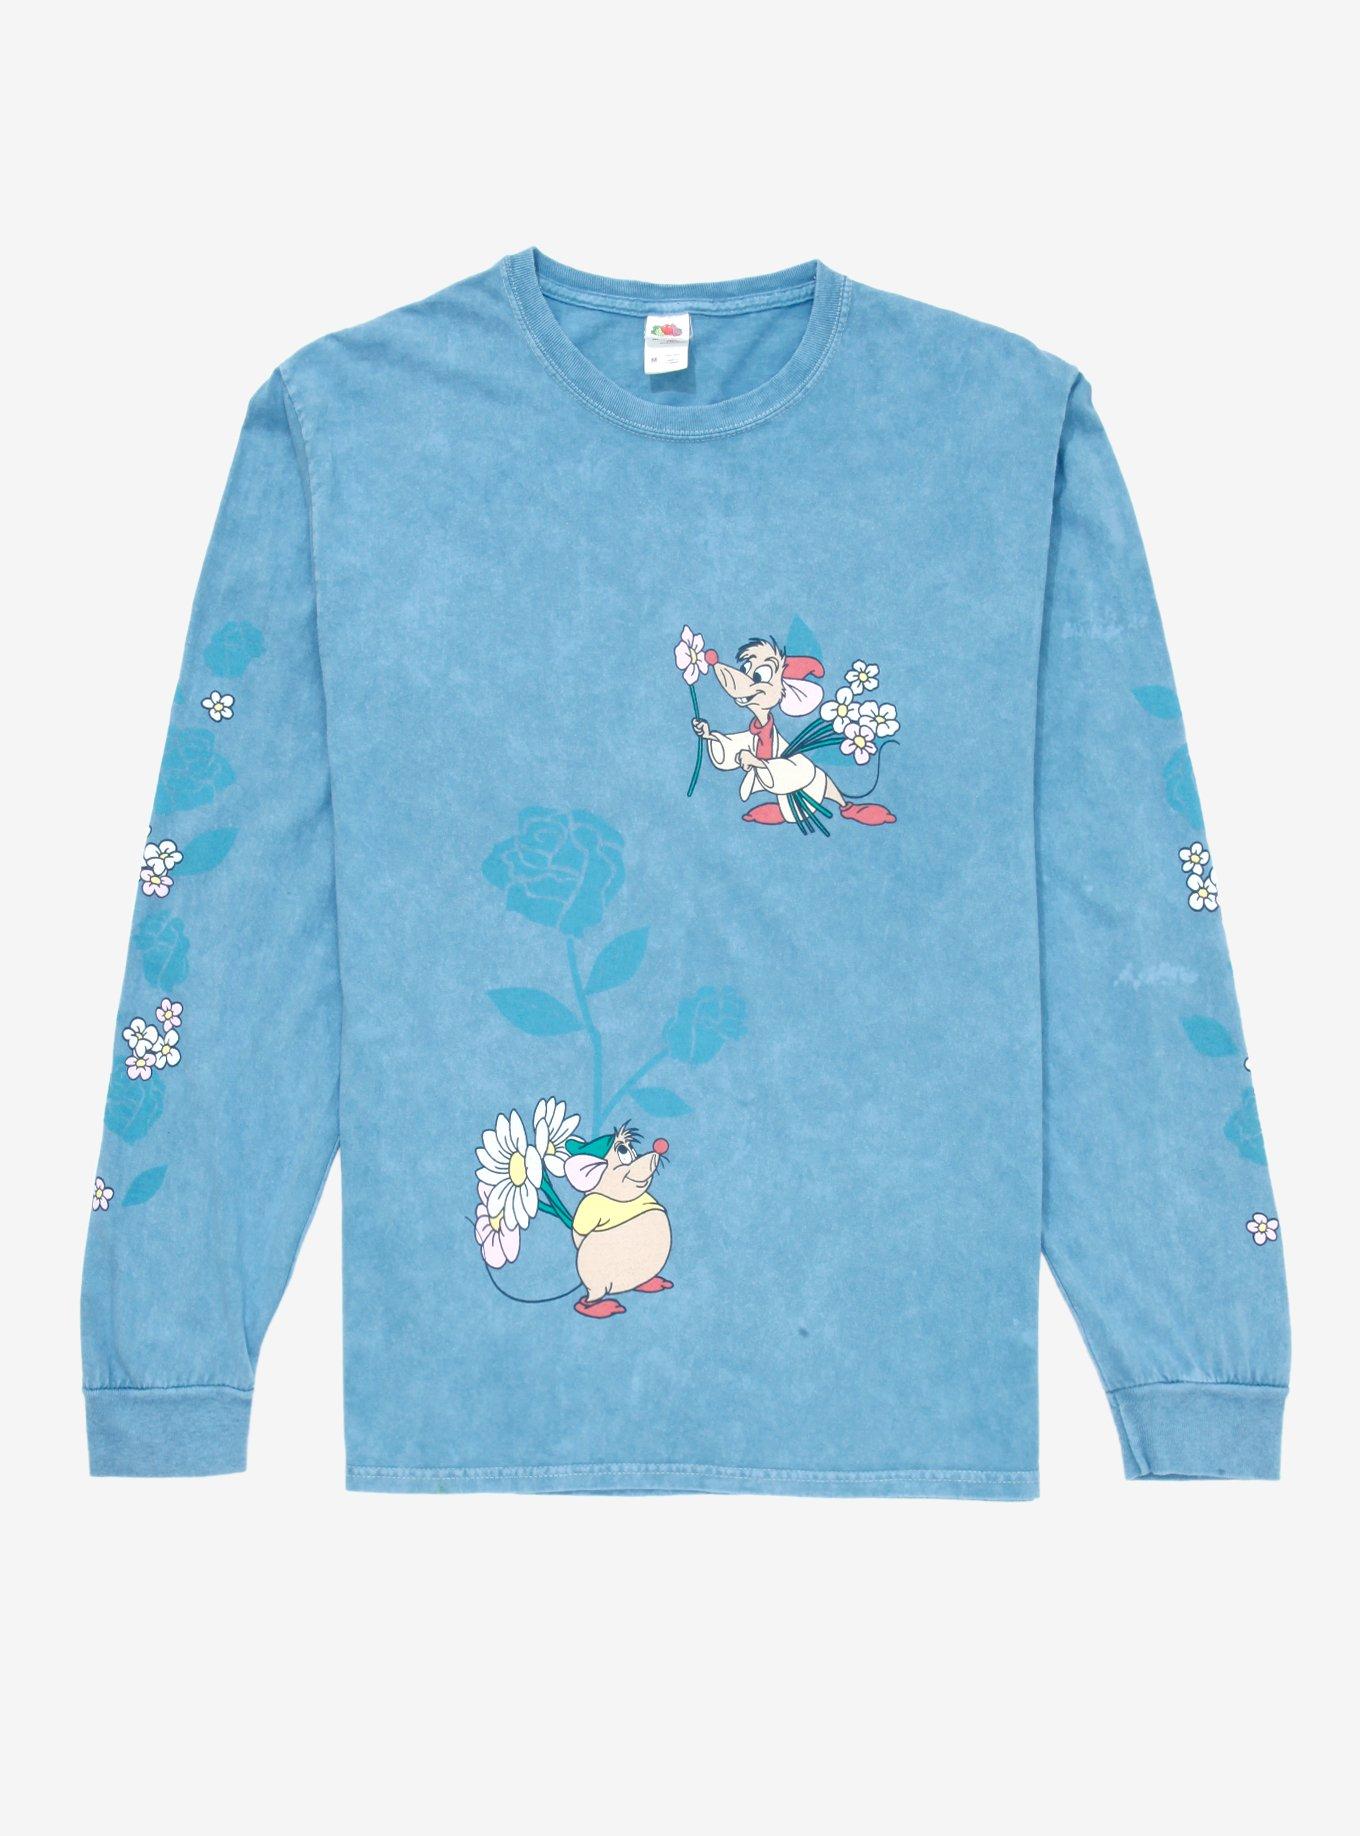 Disney Cinderella Jaq & Gus with Flowers Long Sleeve T-Shirt - BoxLunch ...